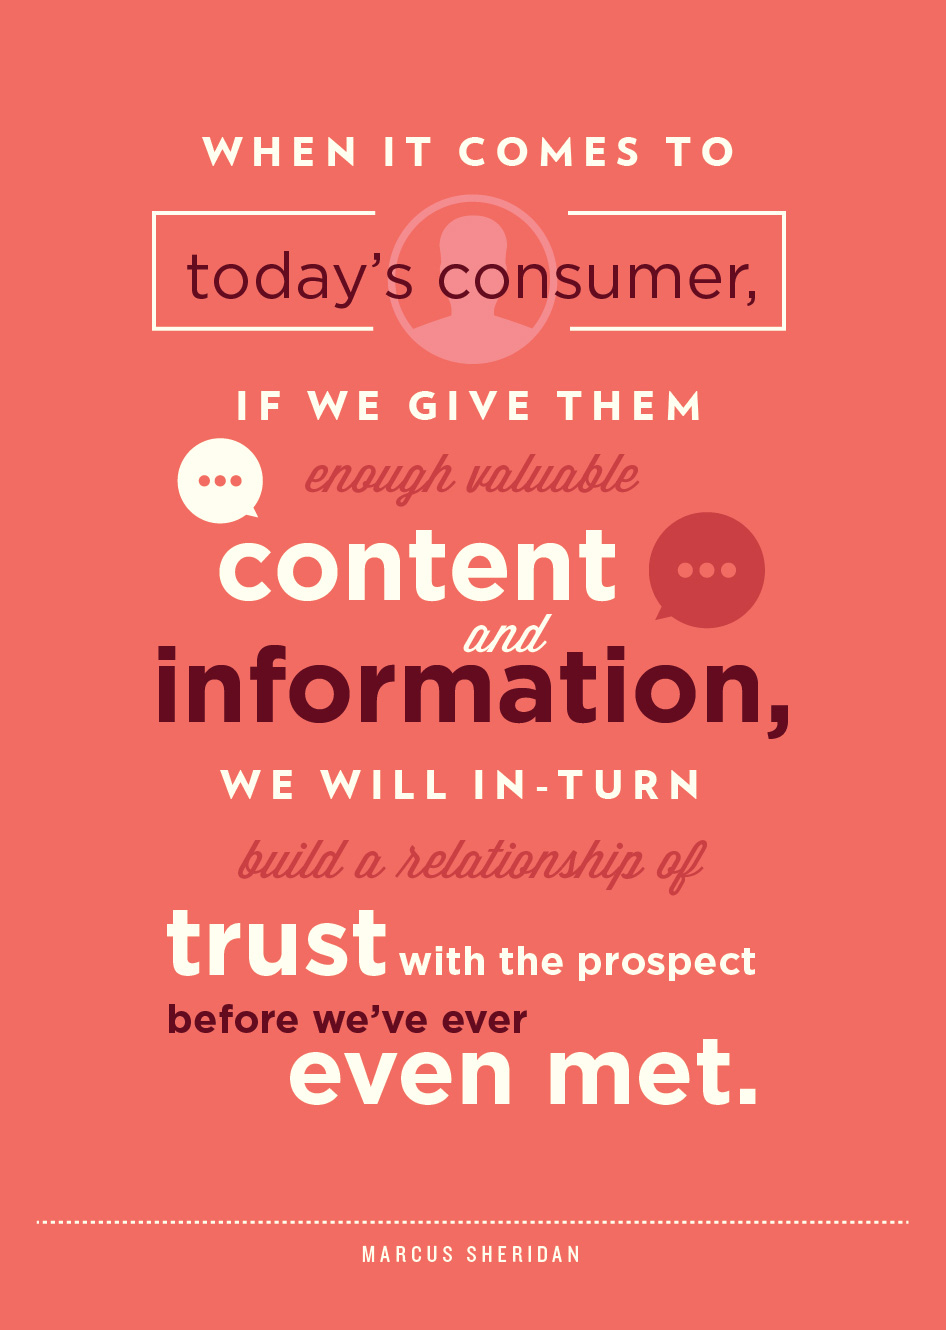 content and information build relationship